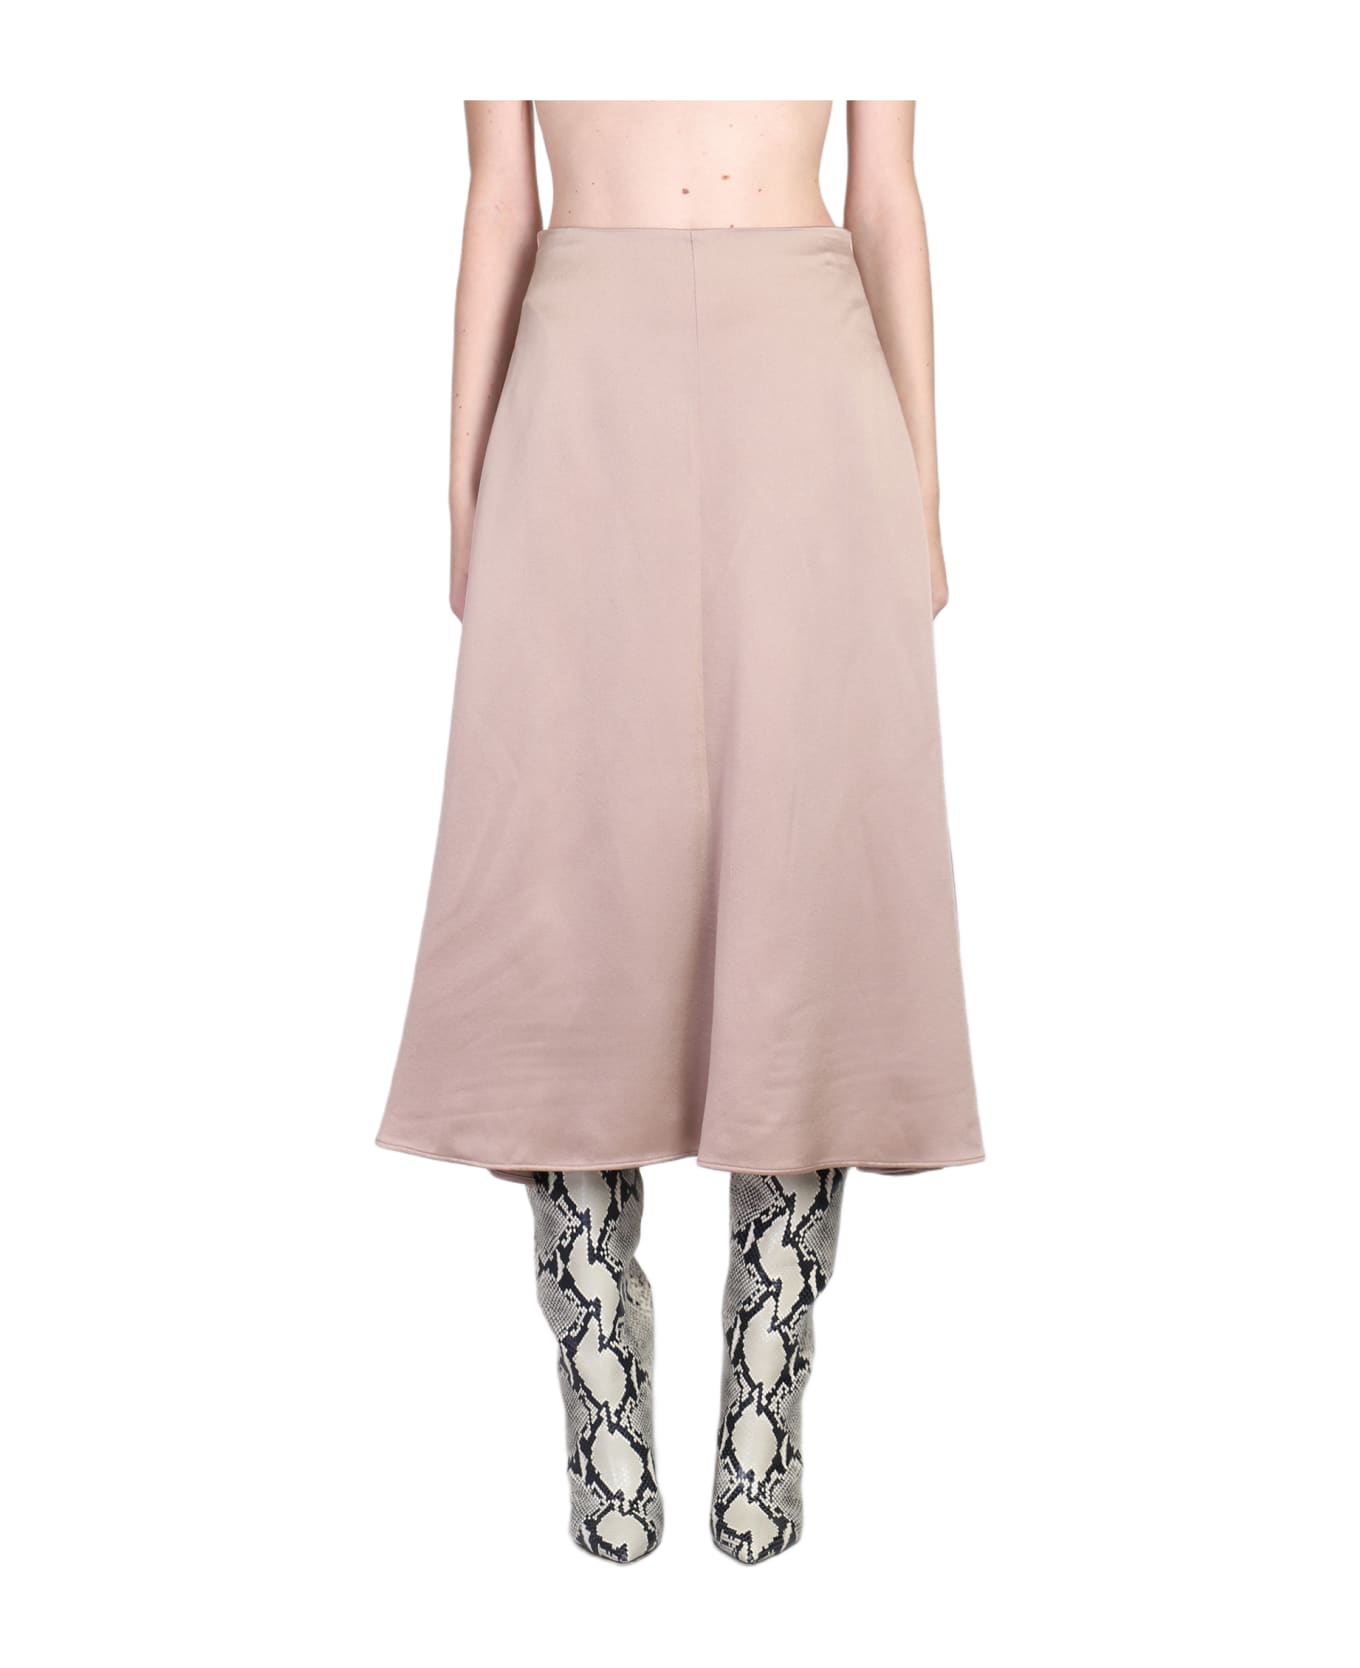 Rochas Skirt In Taupe Acetate - taupe